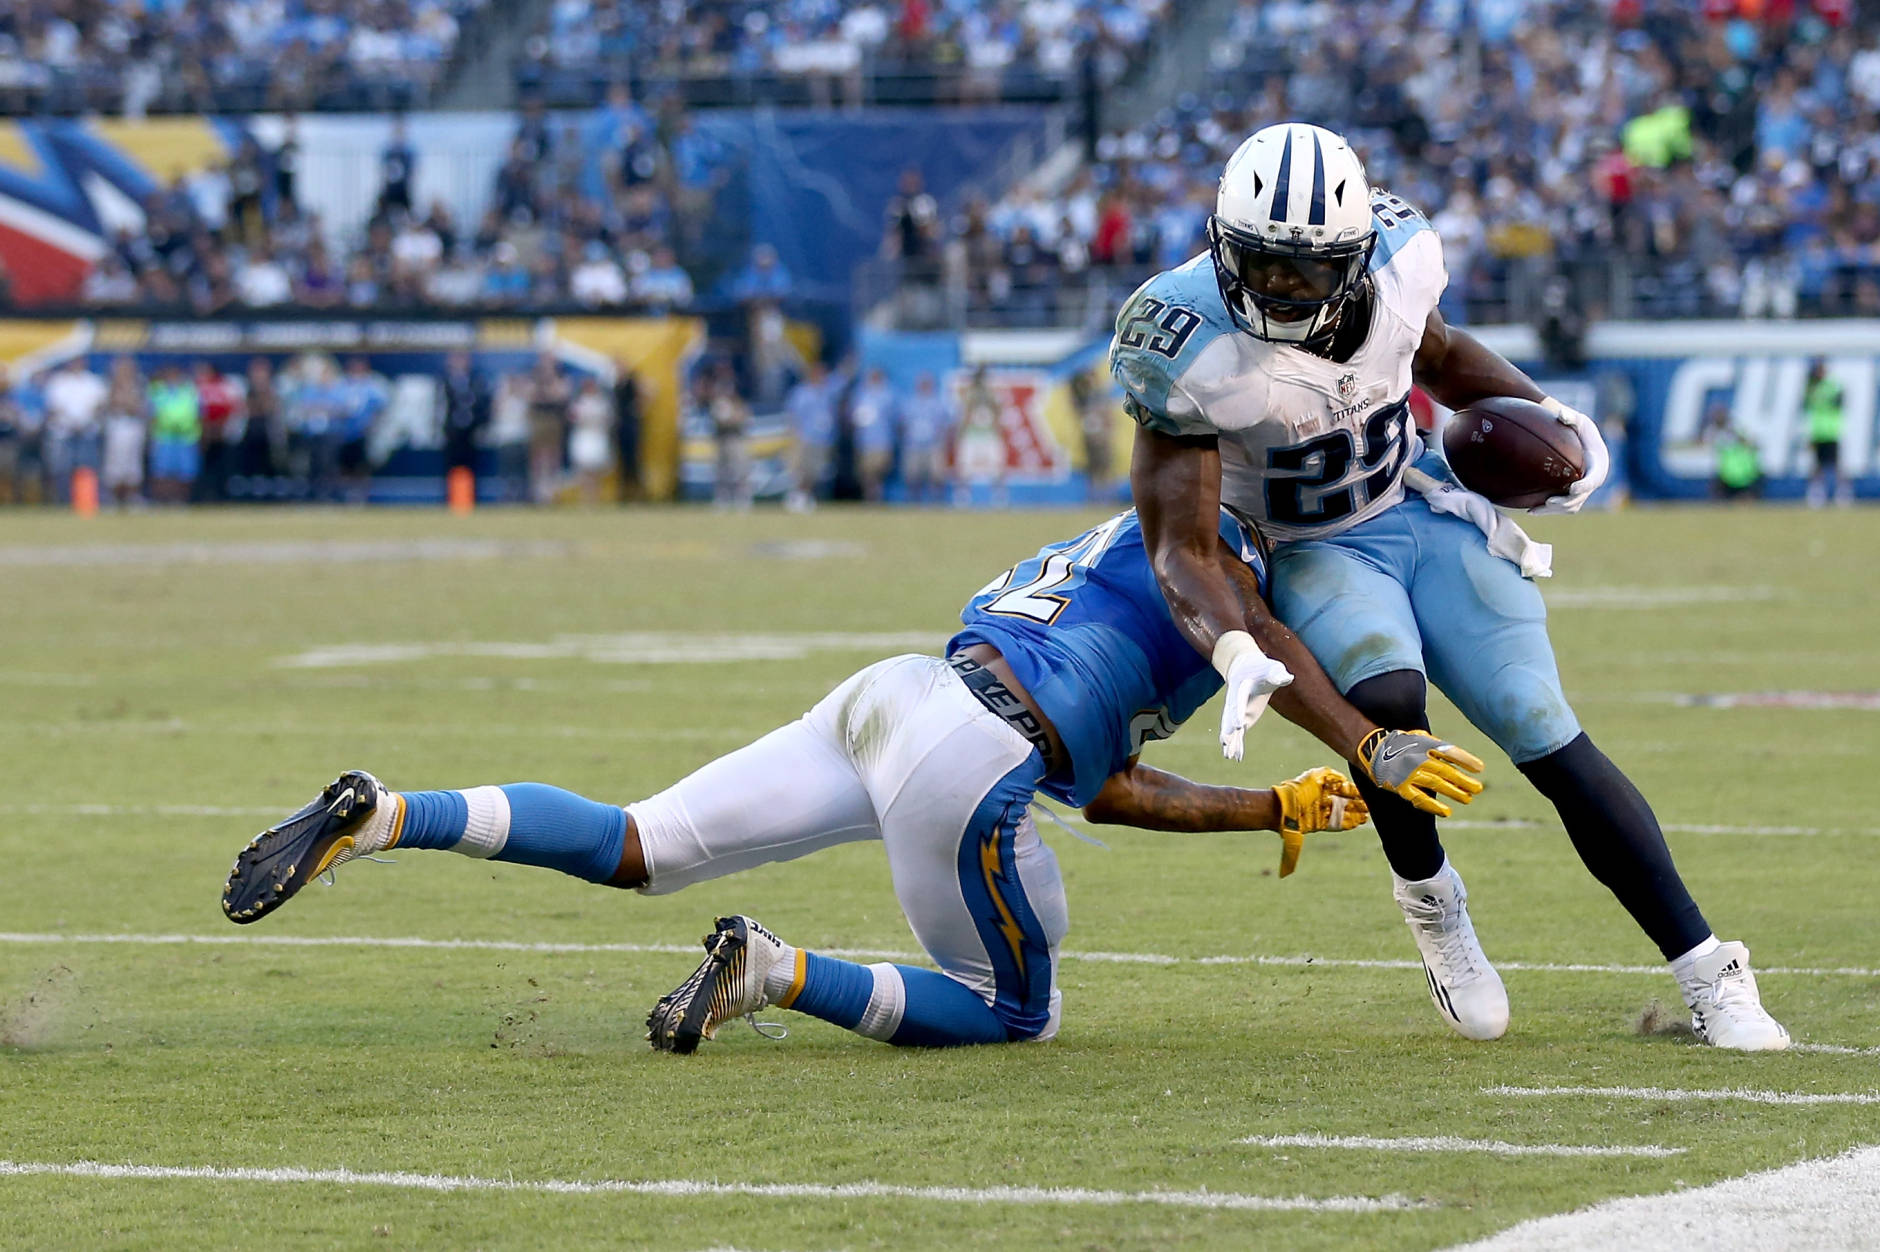 SAN DIEGO, CA - NOVEMBER 06:   DeMarco Murray #29 of the Tennessee Titans eludes  Trevor Williams #42 of the San Diego Chargers during the second half of a game at Qualcomm Stadium on November 6, 2016 in San Diego, California.  (Photo by Sean M. Haffey/Getty Images)